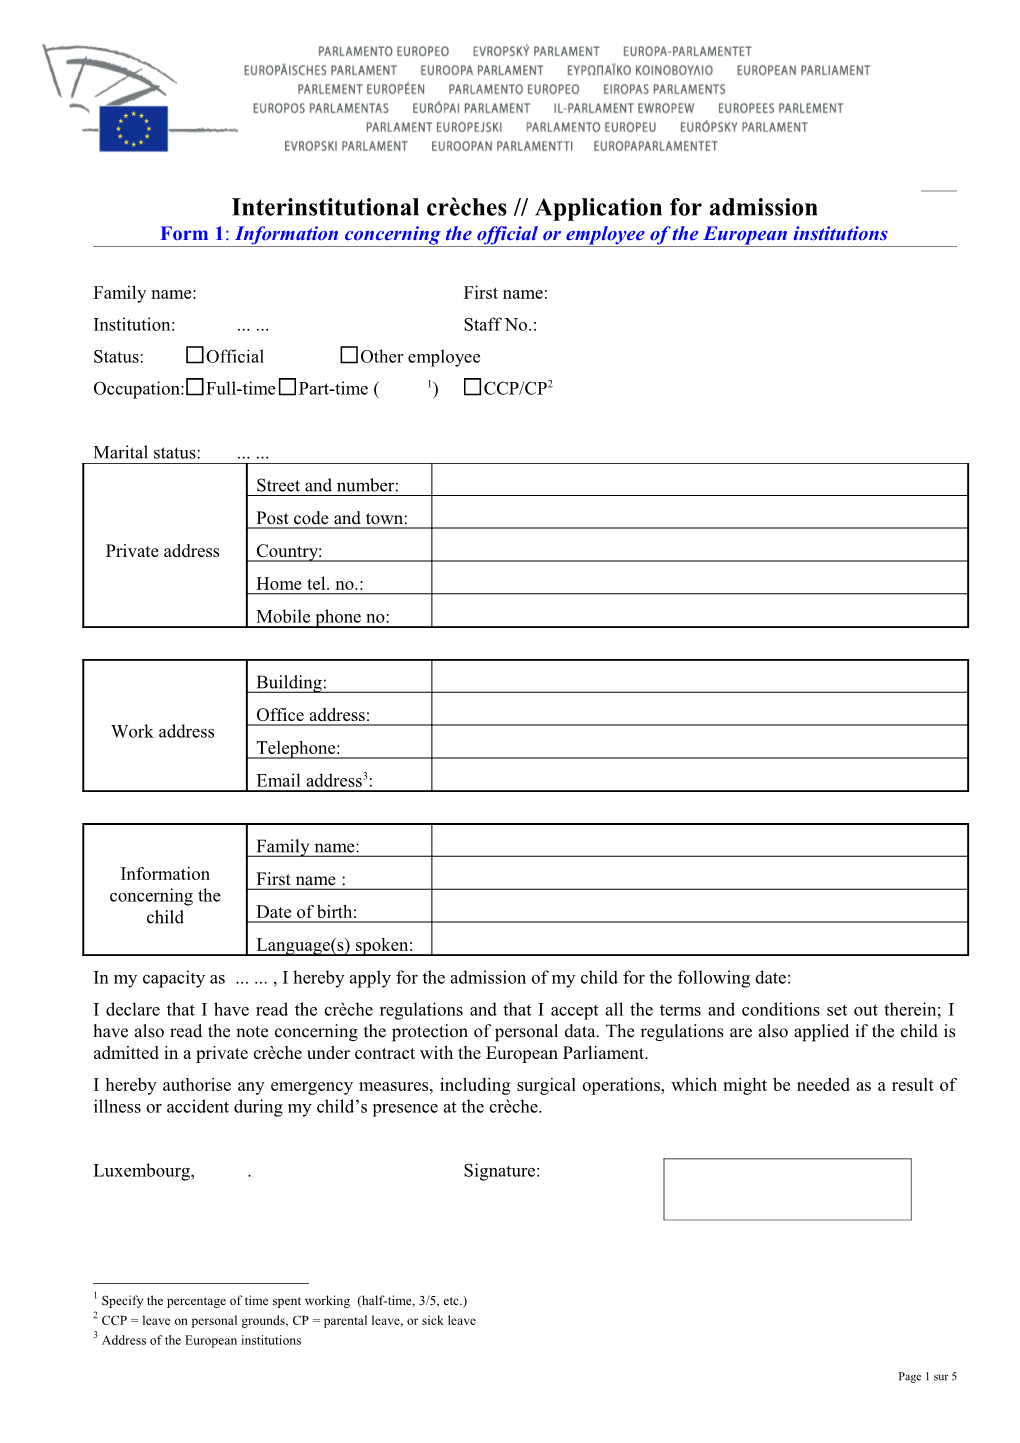 Interinstitutional Crèches Application for Admission